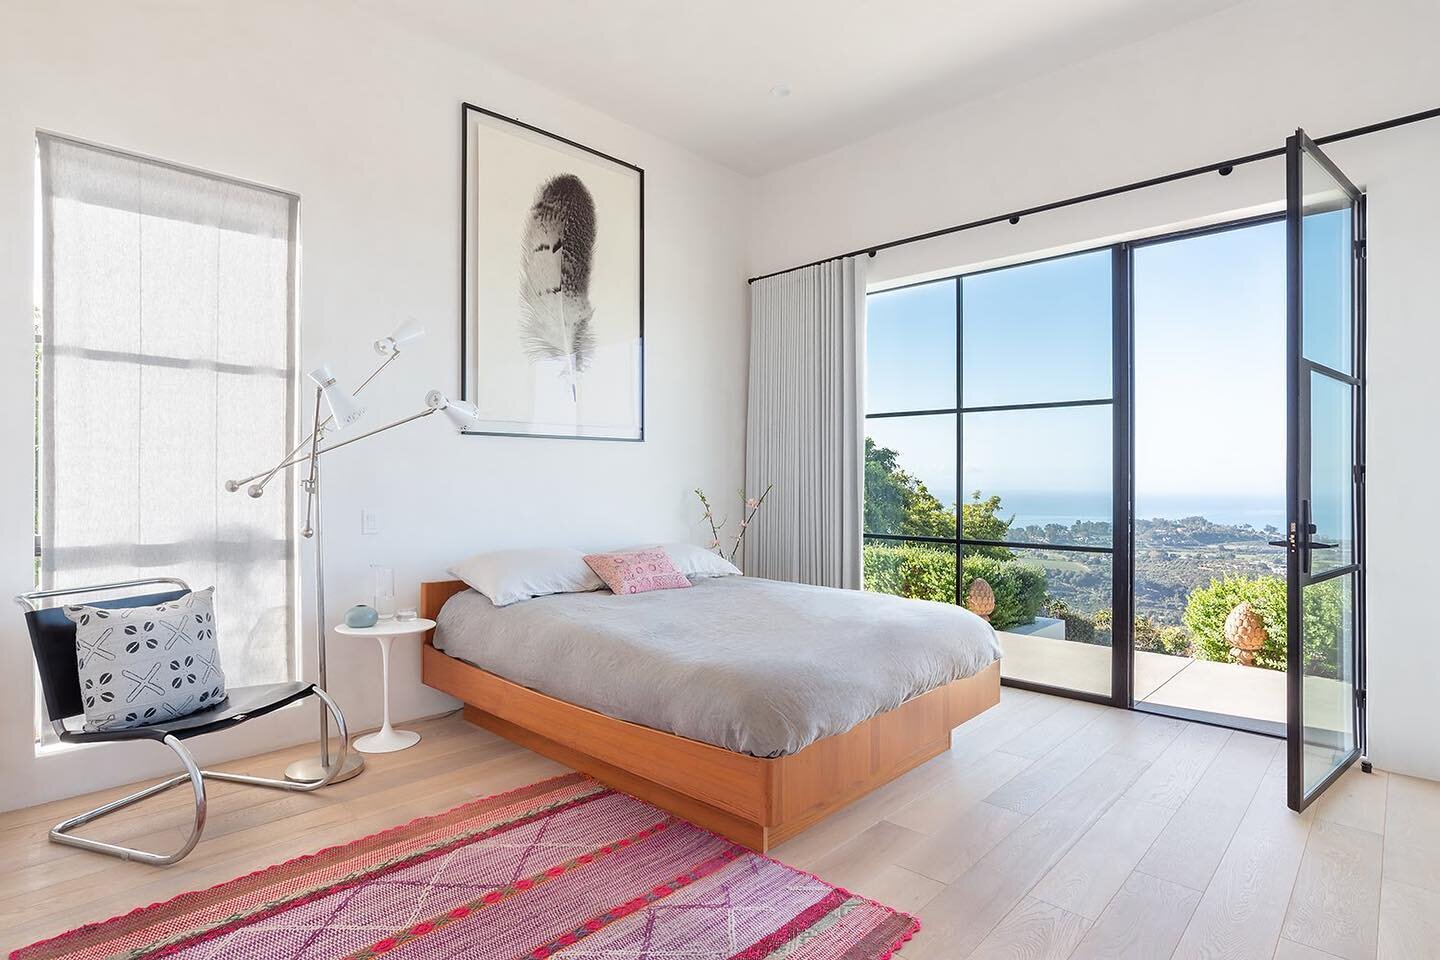 Room with a view 🌊 A bedroom we designed a few years ago, that is still one of my favorites :) #minthomedecordesign  Photo by @crystalwayephoto  #oceanview #steelframeddoors #modernarchitecture #moderndesign #bedroominspo #bedroomdesign #interiors #